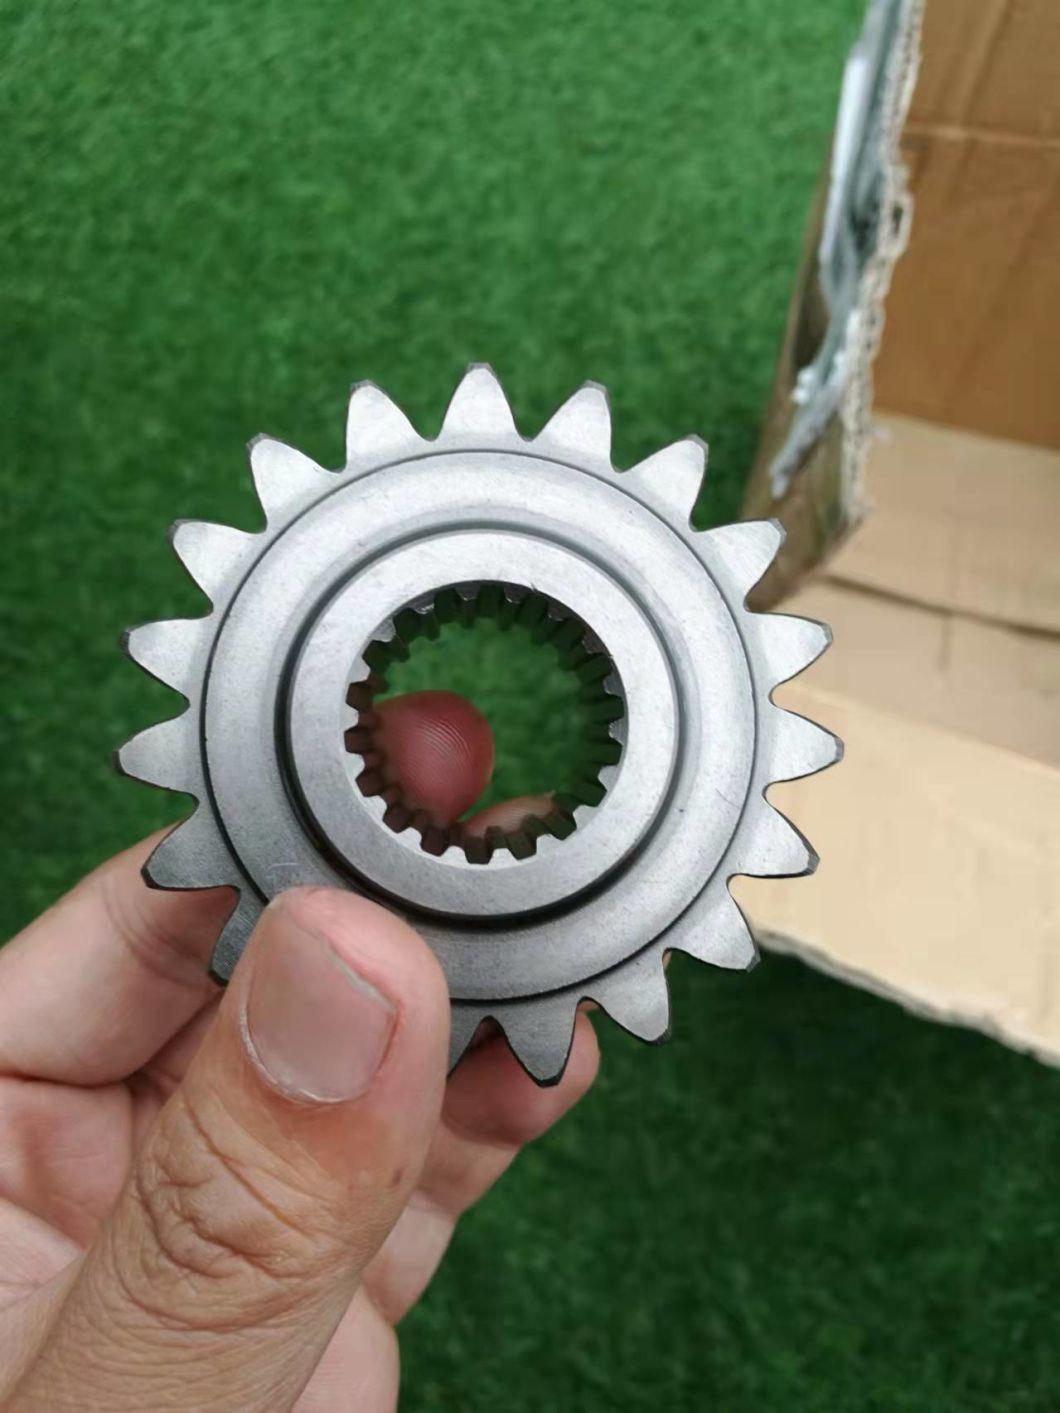 Gear for Agricultural Machinery